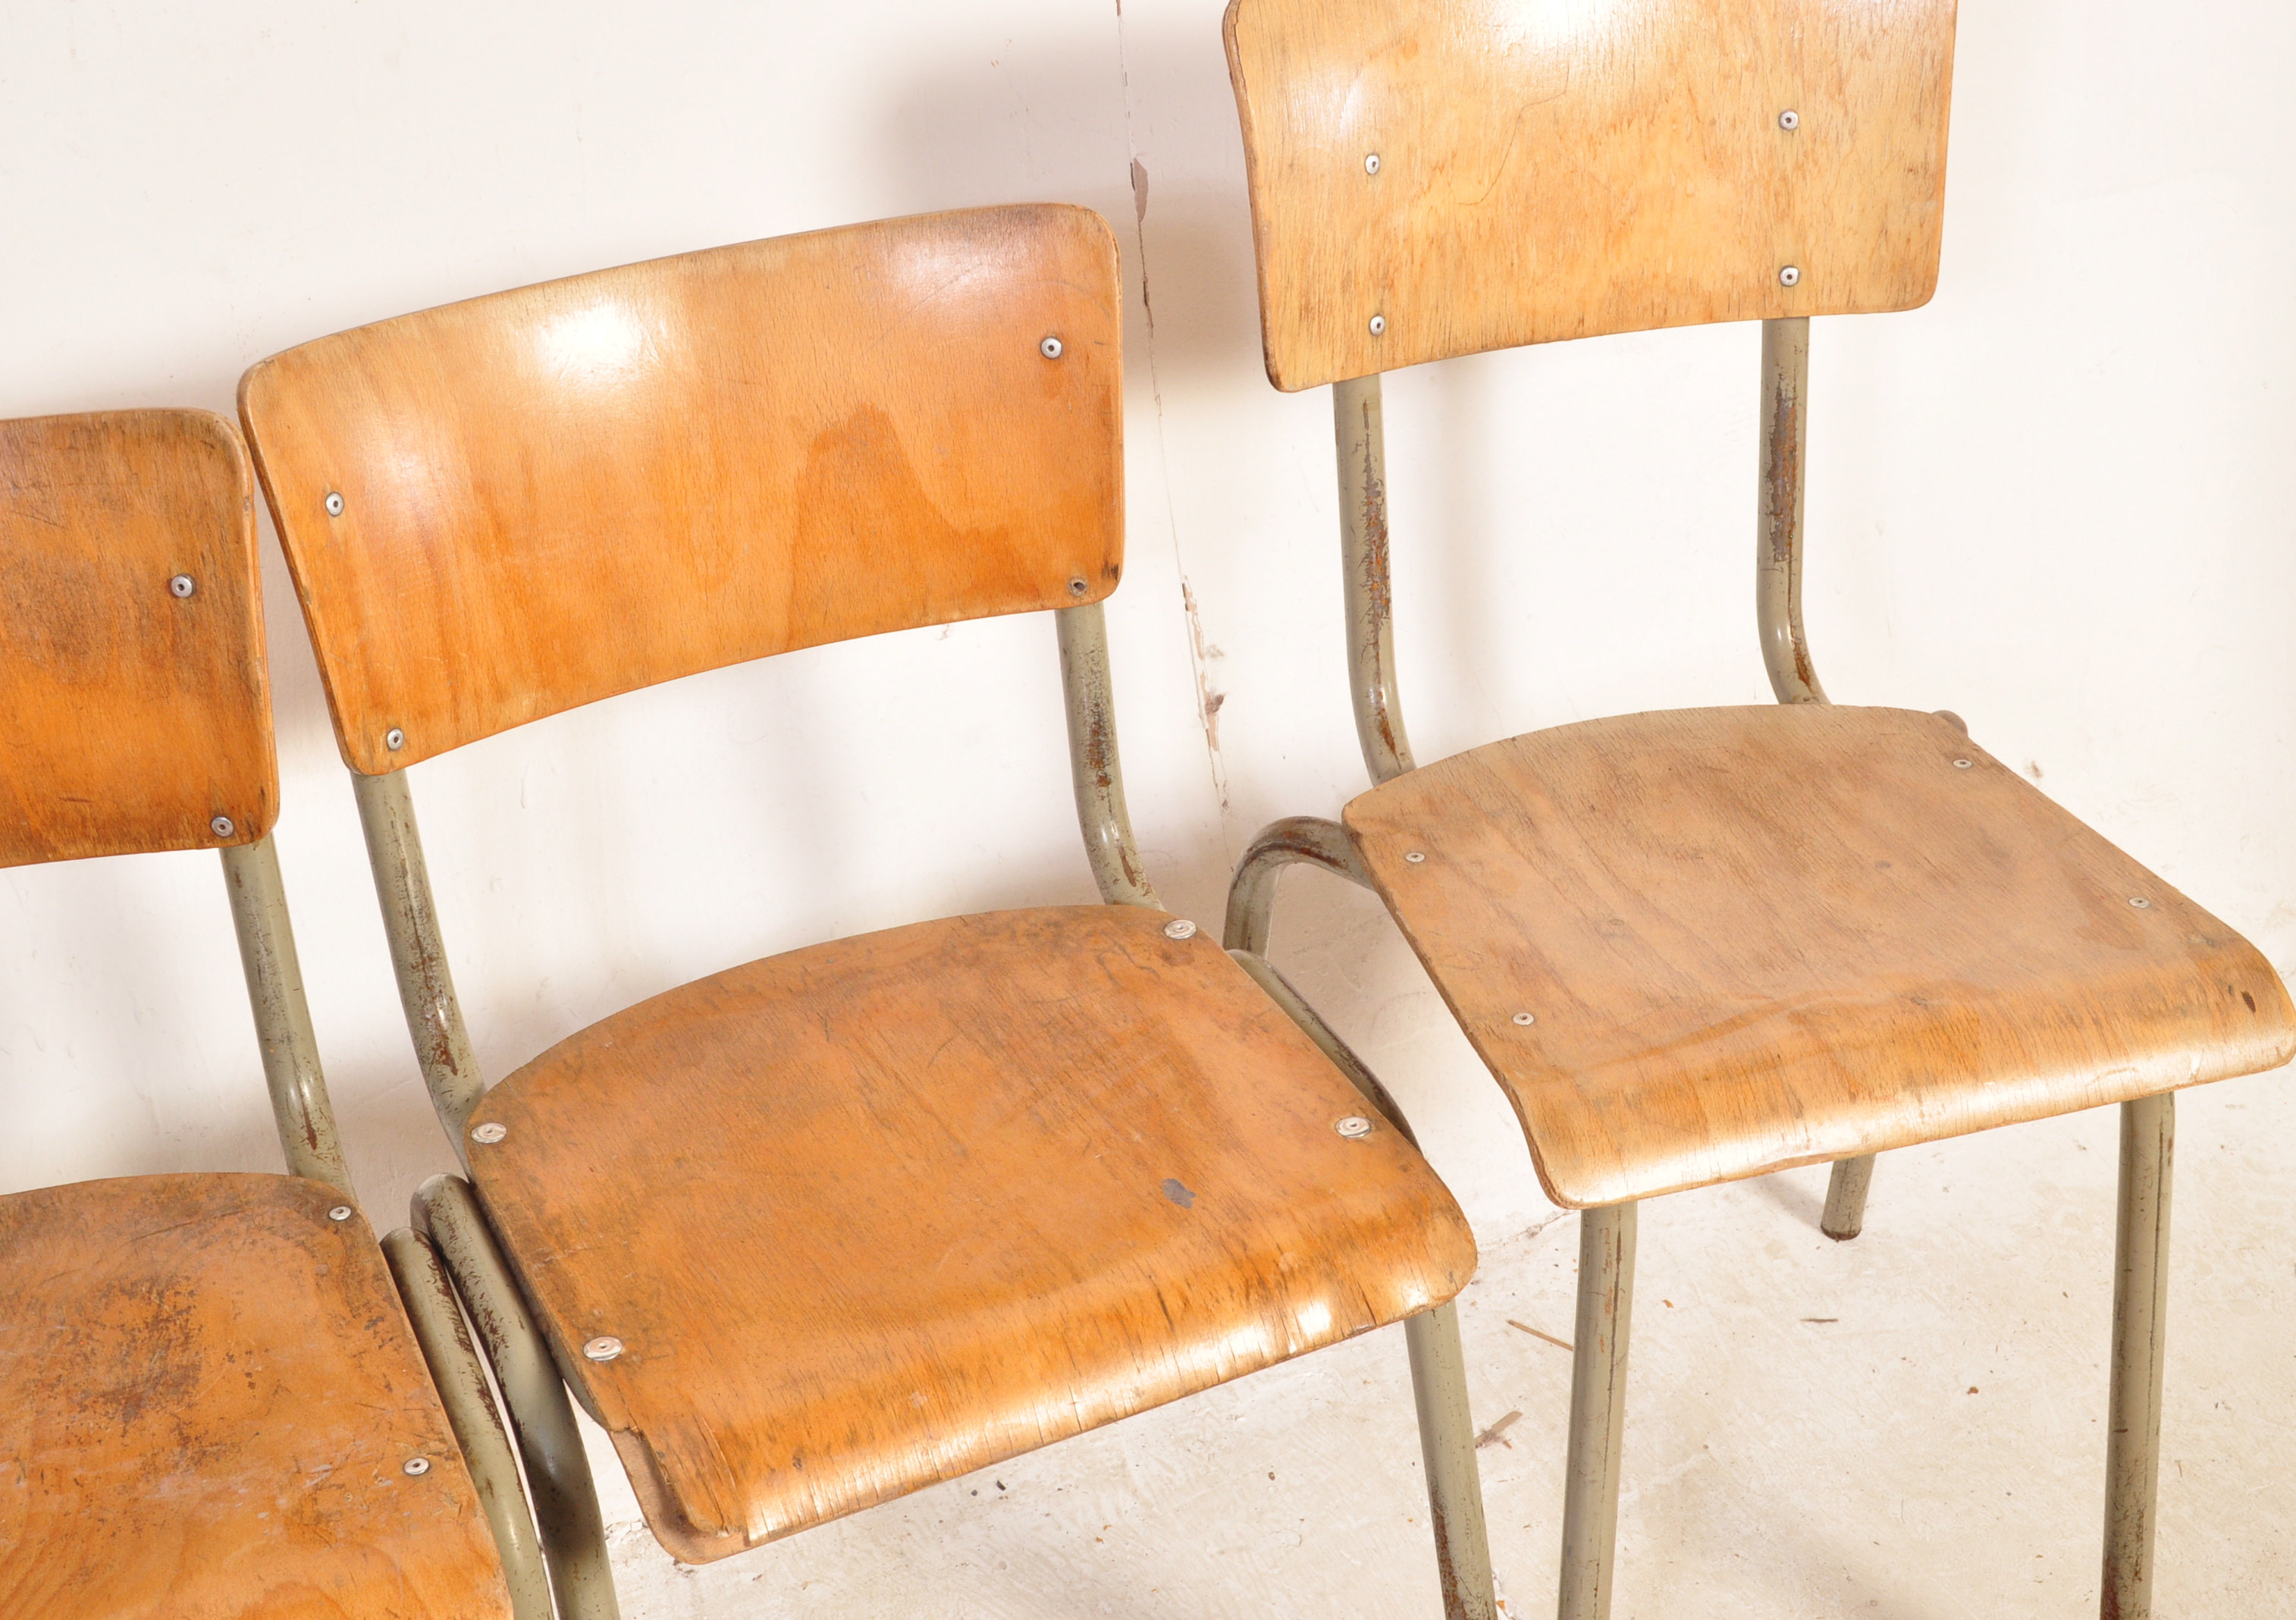 FIVE MID CENTURY INDUSTRIAL CAFE DINING CHAIRS - Image 3 of 4